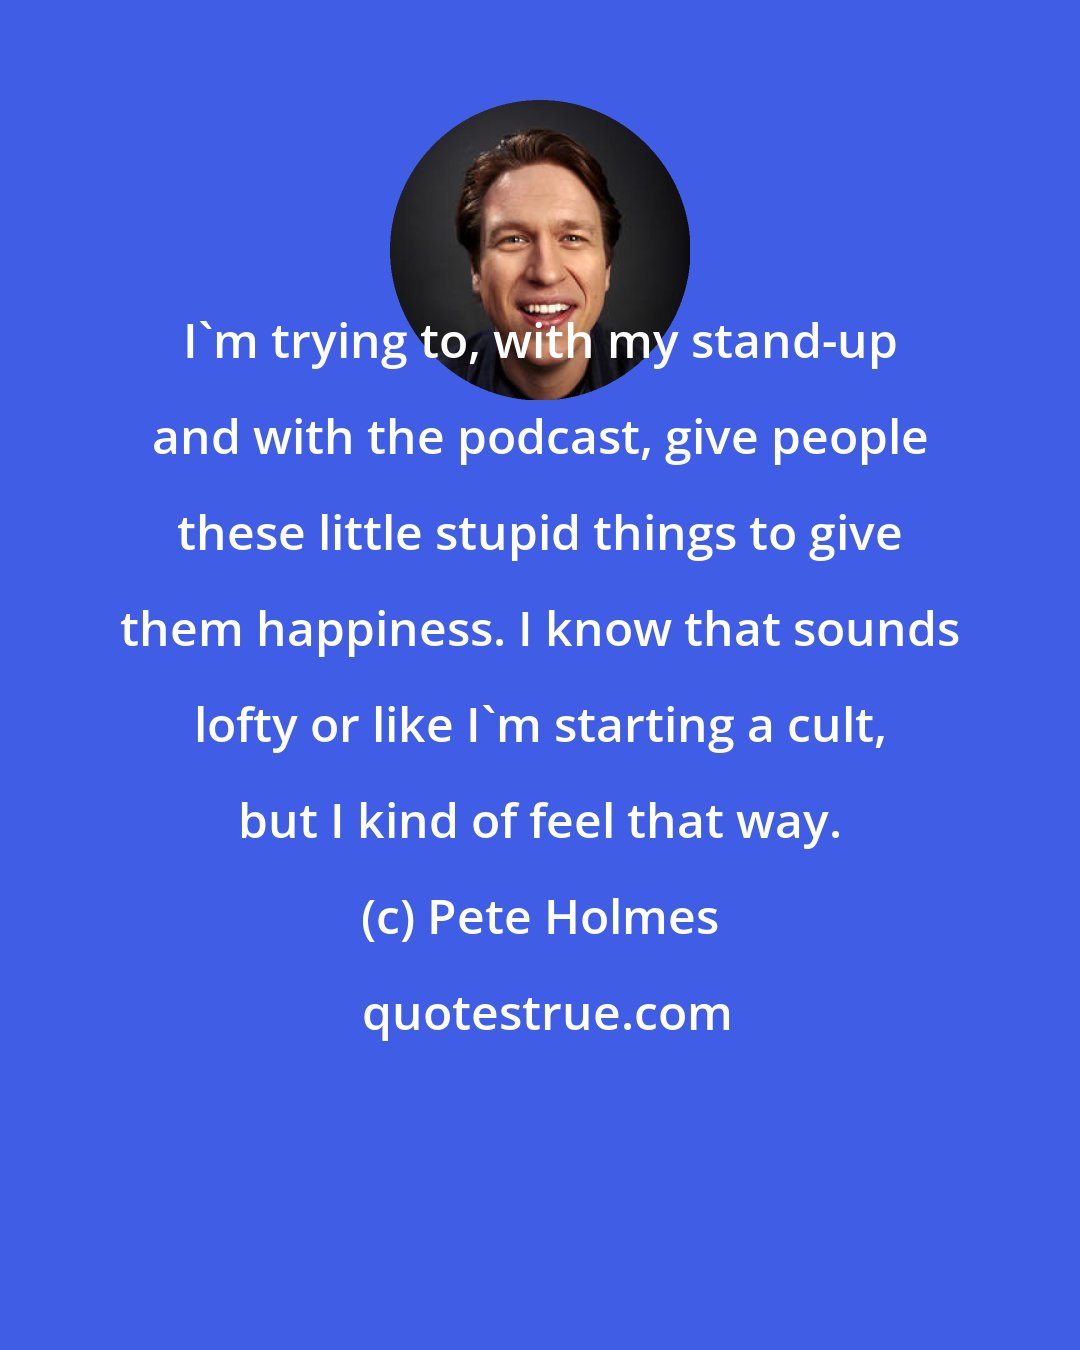 Pete Holmes: I'm trying to, with my stand-up and with the podcast, give people these little stupid things to give them happiness. I know that sounds lofty or like I'm starting a cult, but I kind of feel that way.